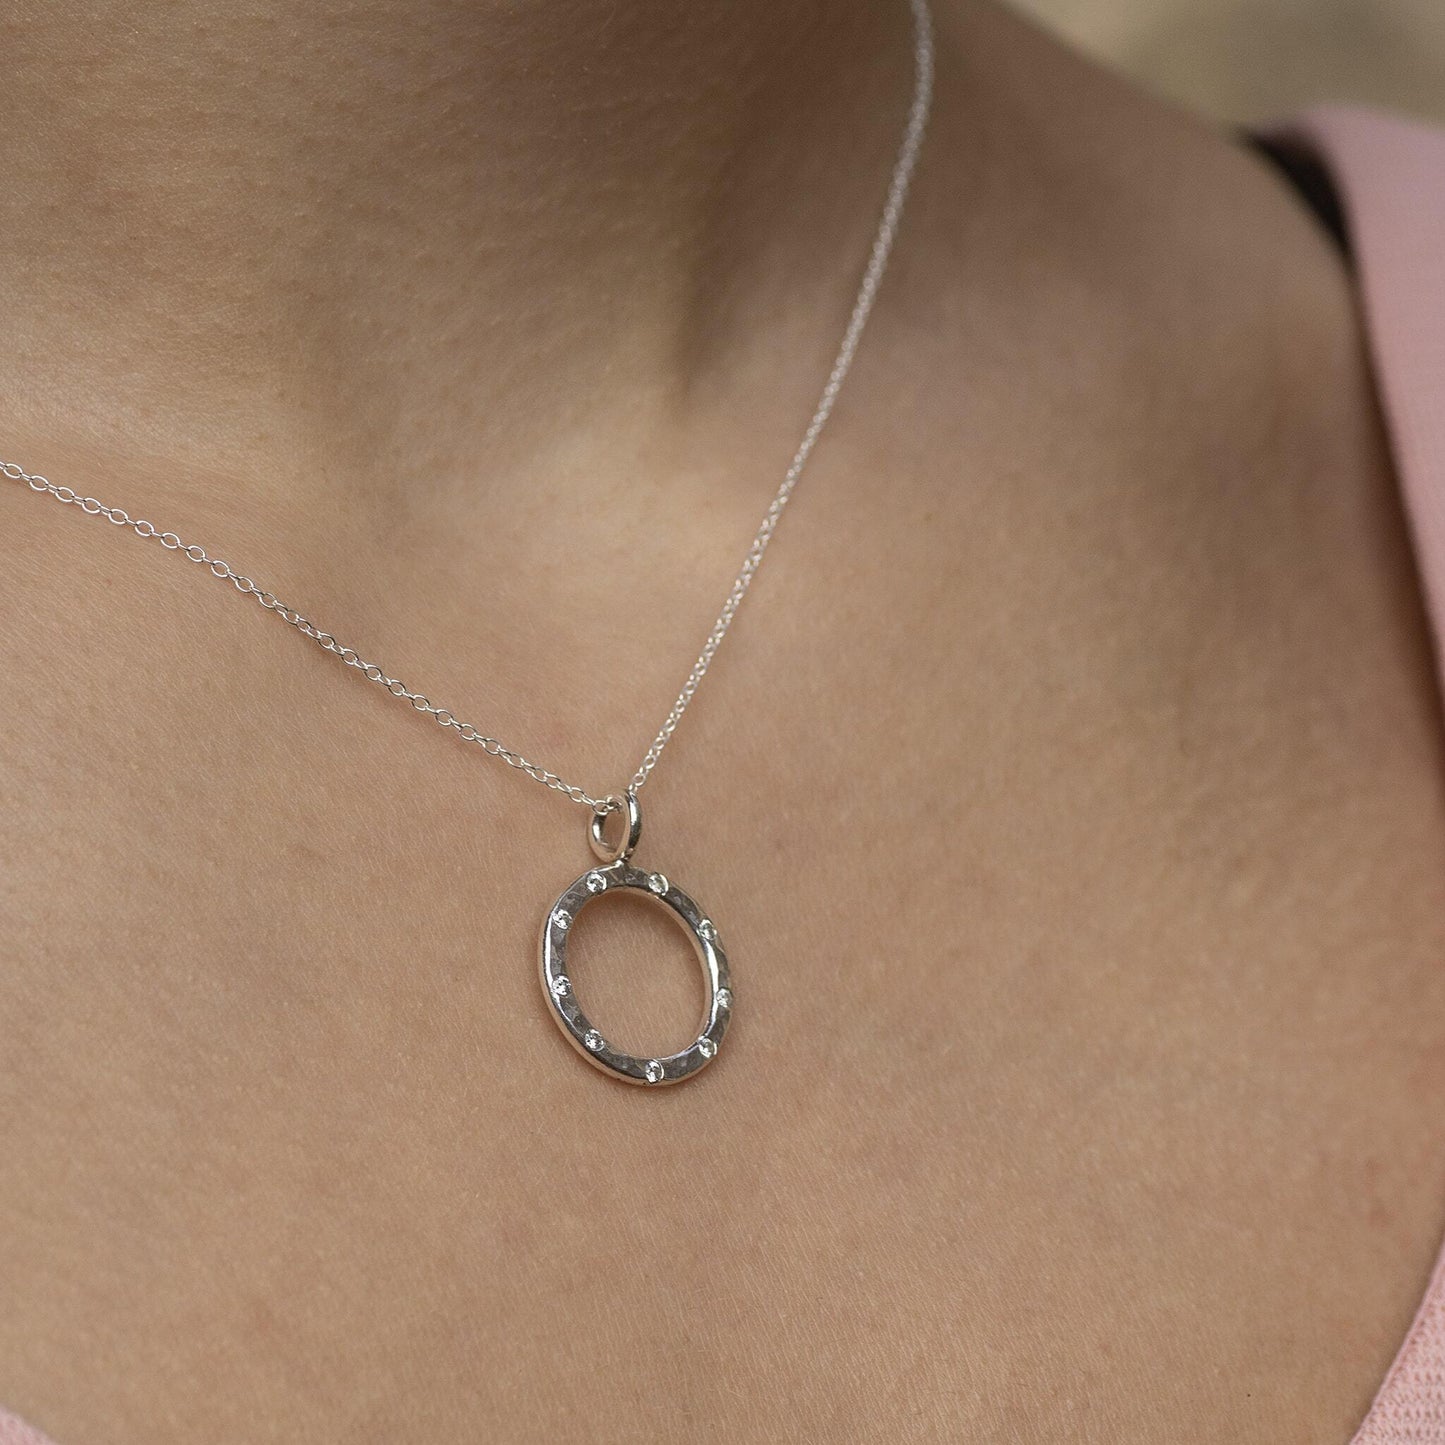 9th Anniversary Gift - Silver Diamond Halo Necklace - 9 Diamonds for 9 Years